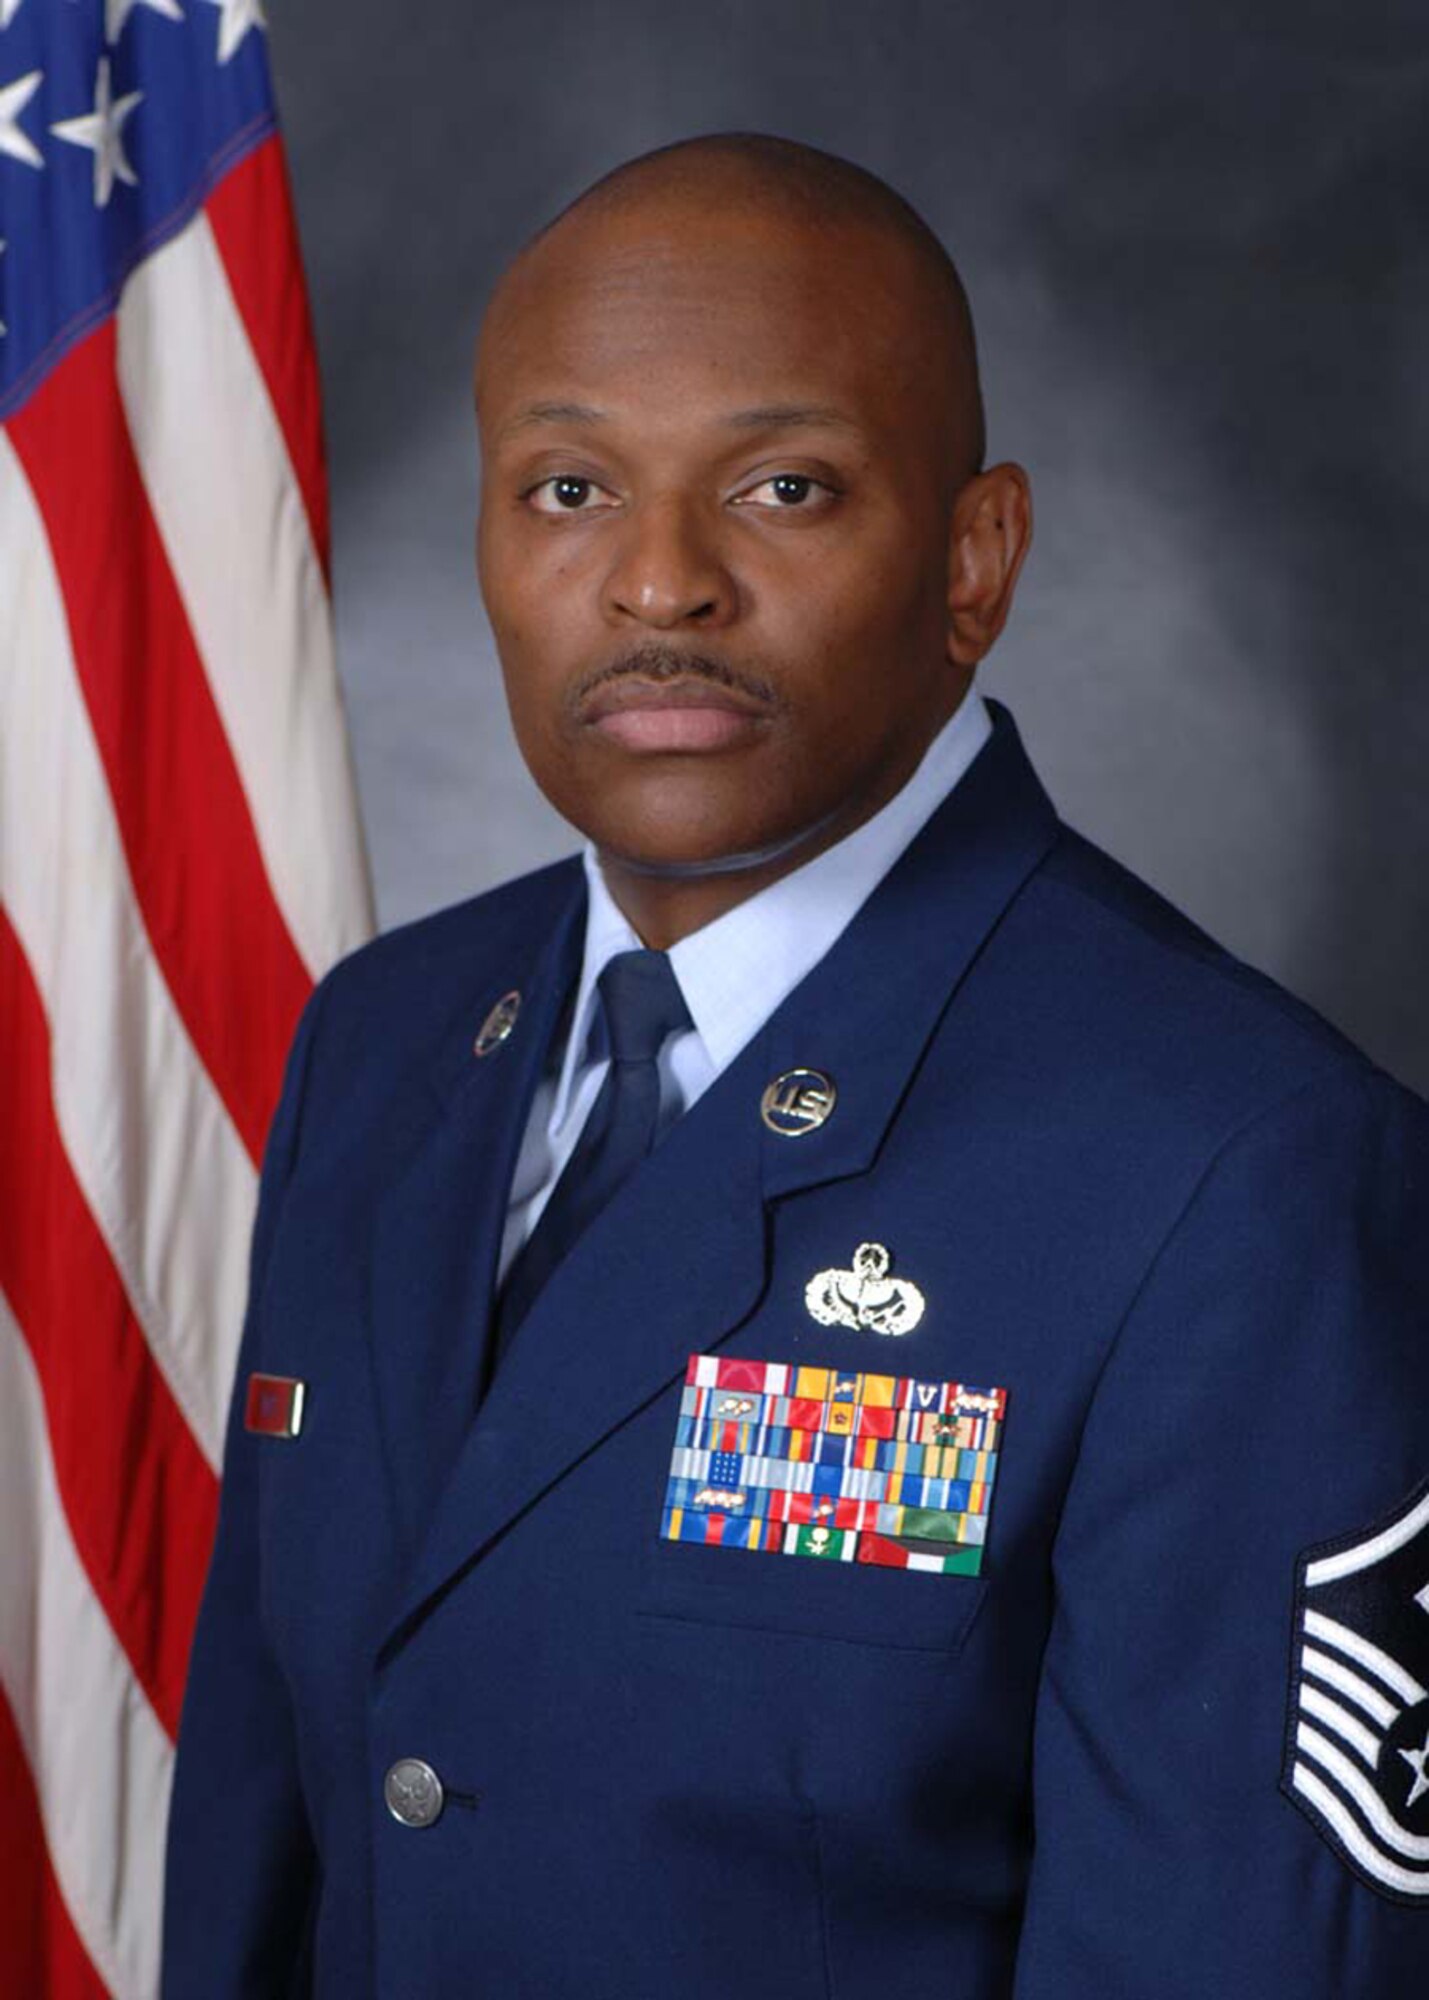 OFFUTT AIR FORCE BASE, Neb. -- Master Sgt. Darryl D. Ross, from Mountain Home AFB, Idaho., is one of 29 Airmen nominated for awards who will attend the 2010 Air Combat Command Outstanding Airmen of the Year Awards Banquet in Omaha, Neb., April 21. Sergeant Ross is nominated for the First Sergeant of the Year Award. U.S. Air Force courtesy photo